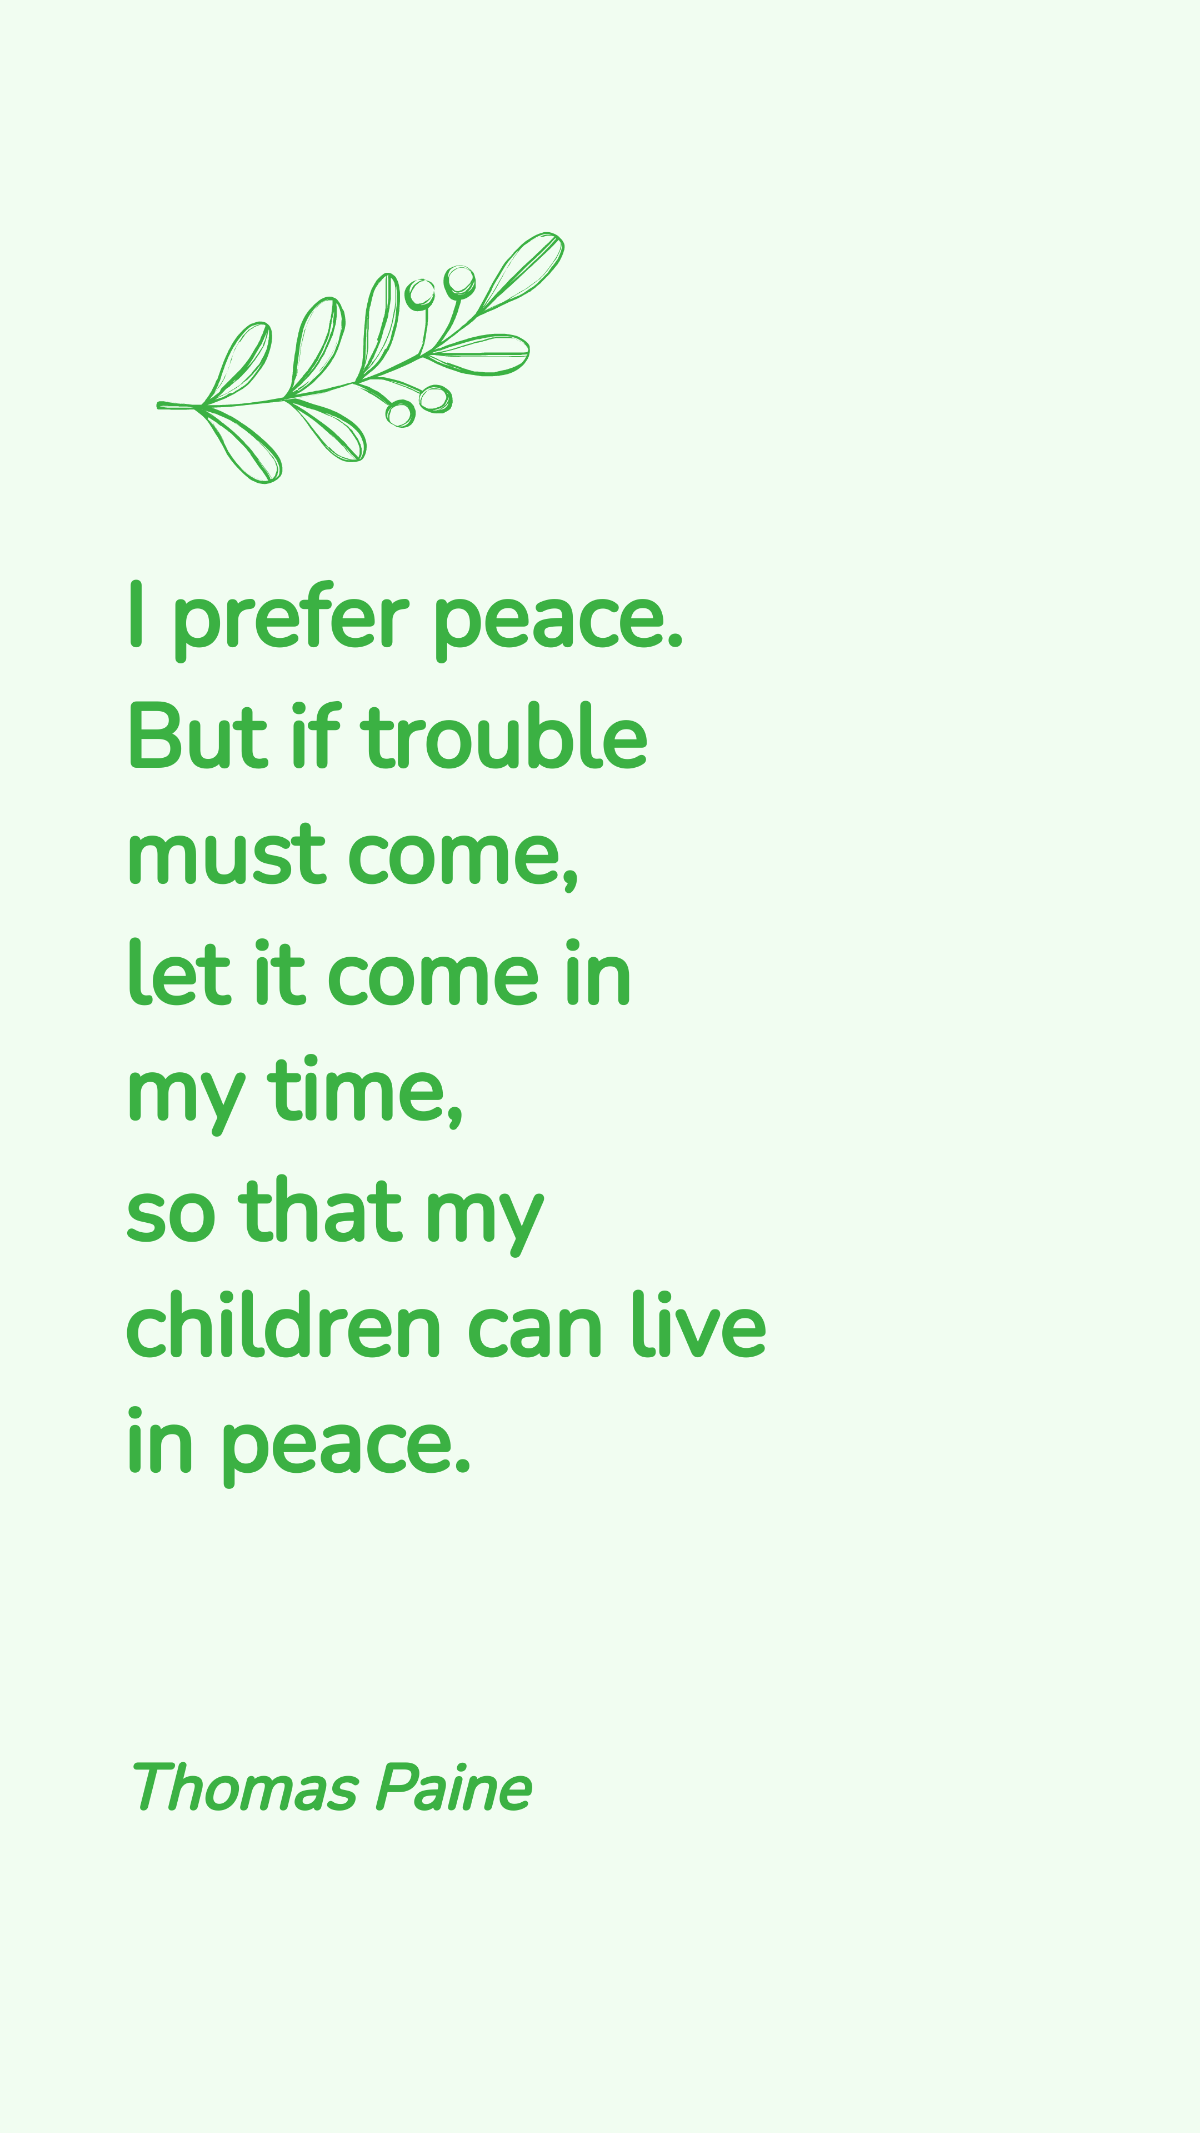 Free Thomas Paine - I prefer peace. But if trouble must come, let it come in my time, so that my children can live in peace.  Template